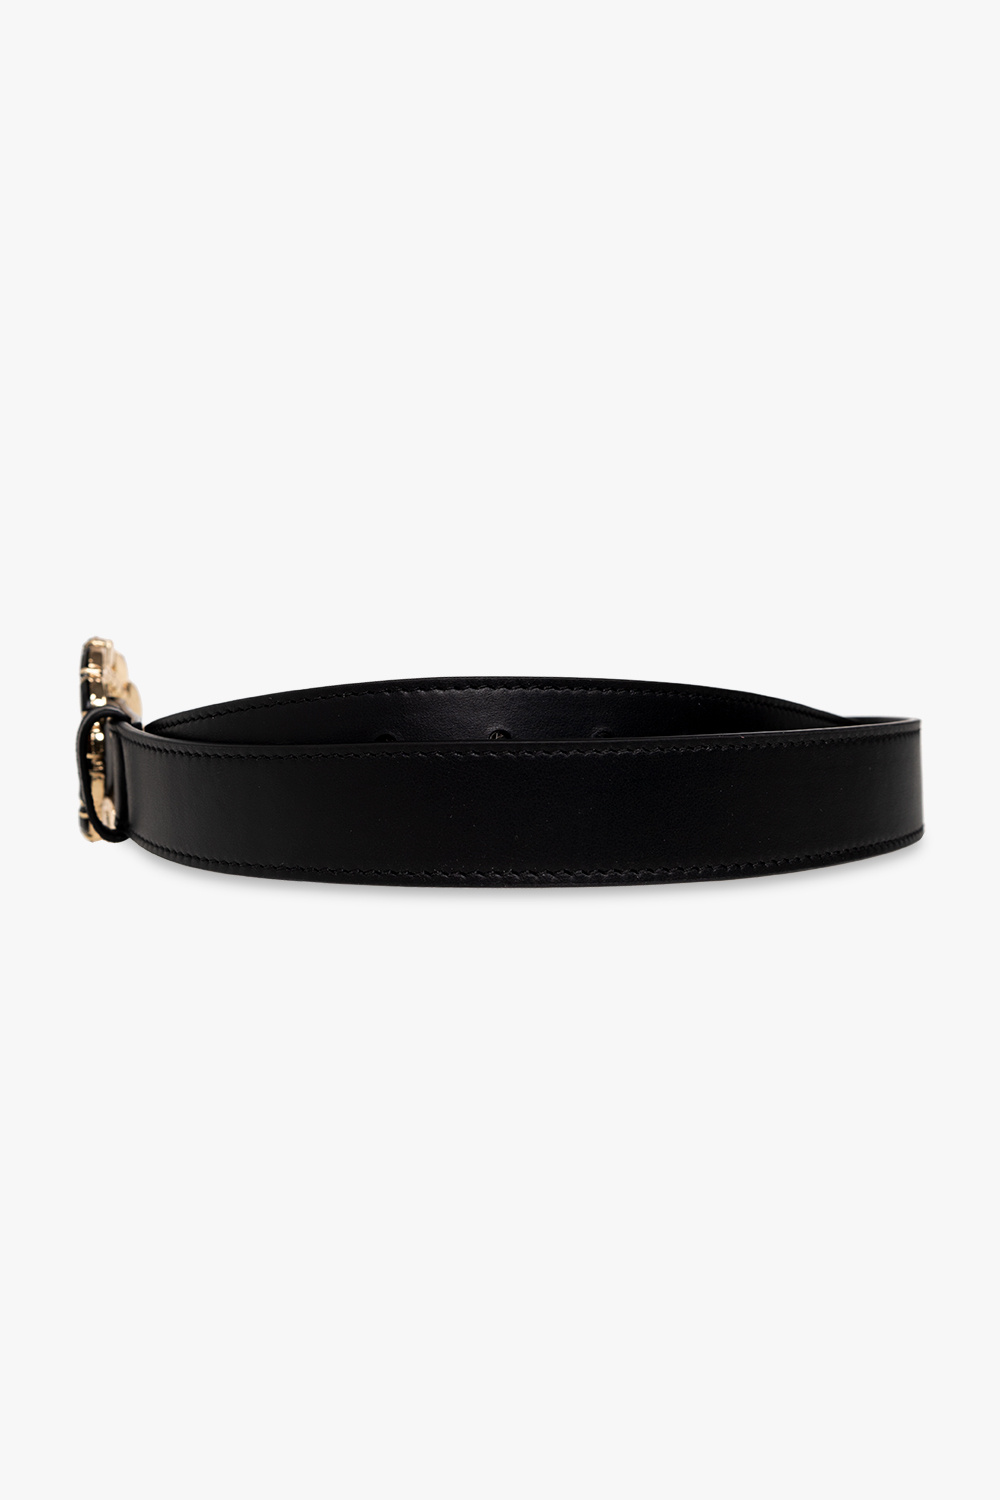 Erdem Leather belt with decorative buckle